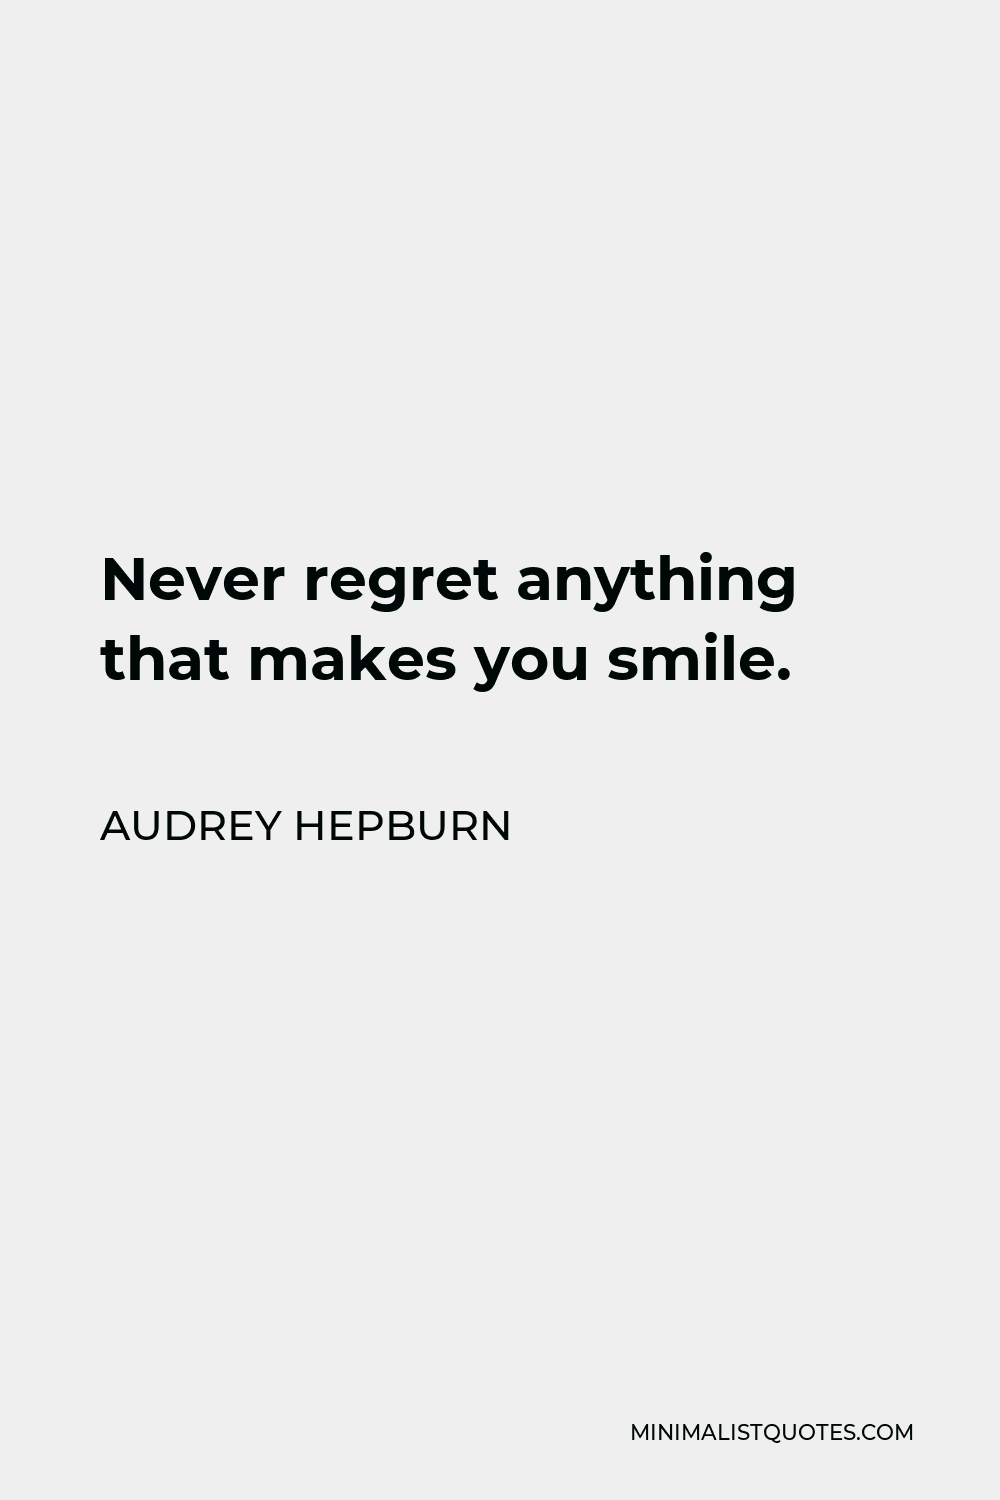 Audrey Hepburn Quote - Never regret anything that makes you smile.